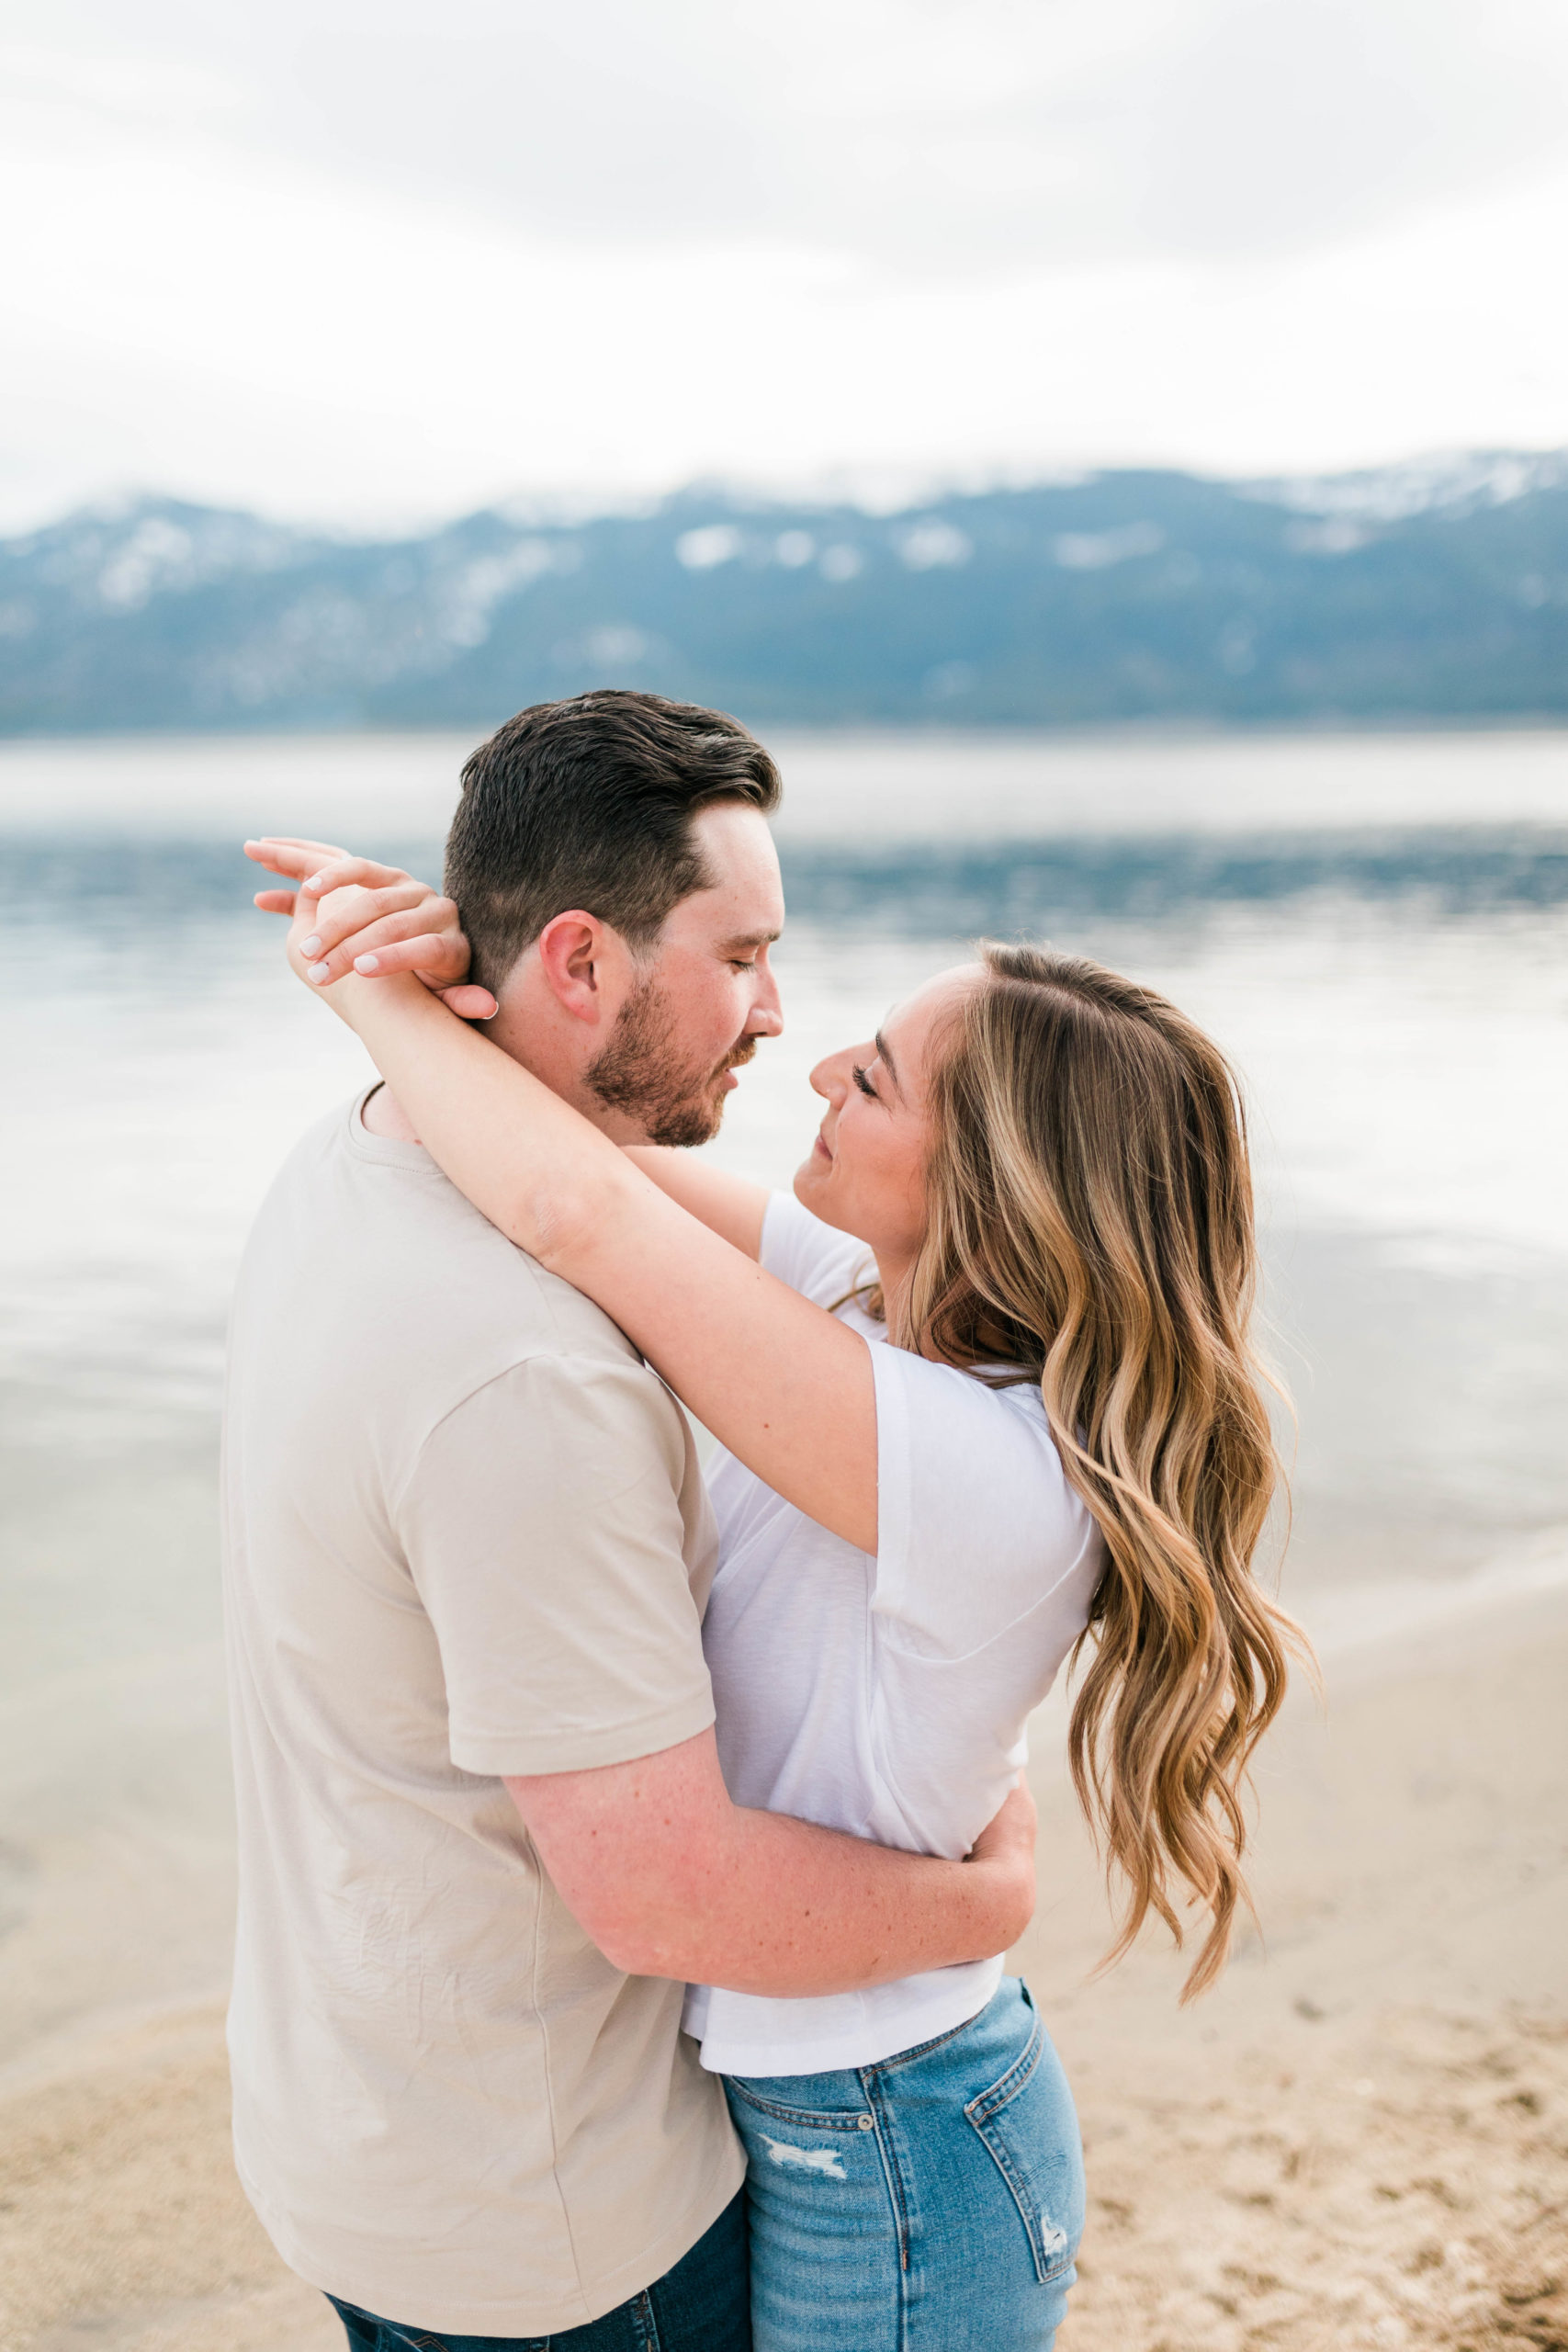 lake engagement photos with man and woman embracing each other in Boise Idaho photoshoot